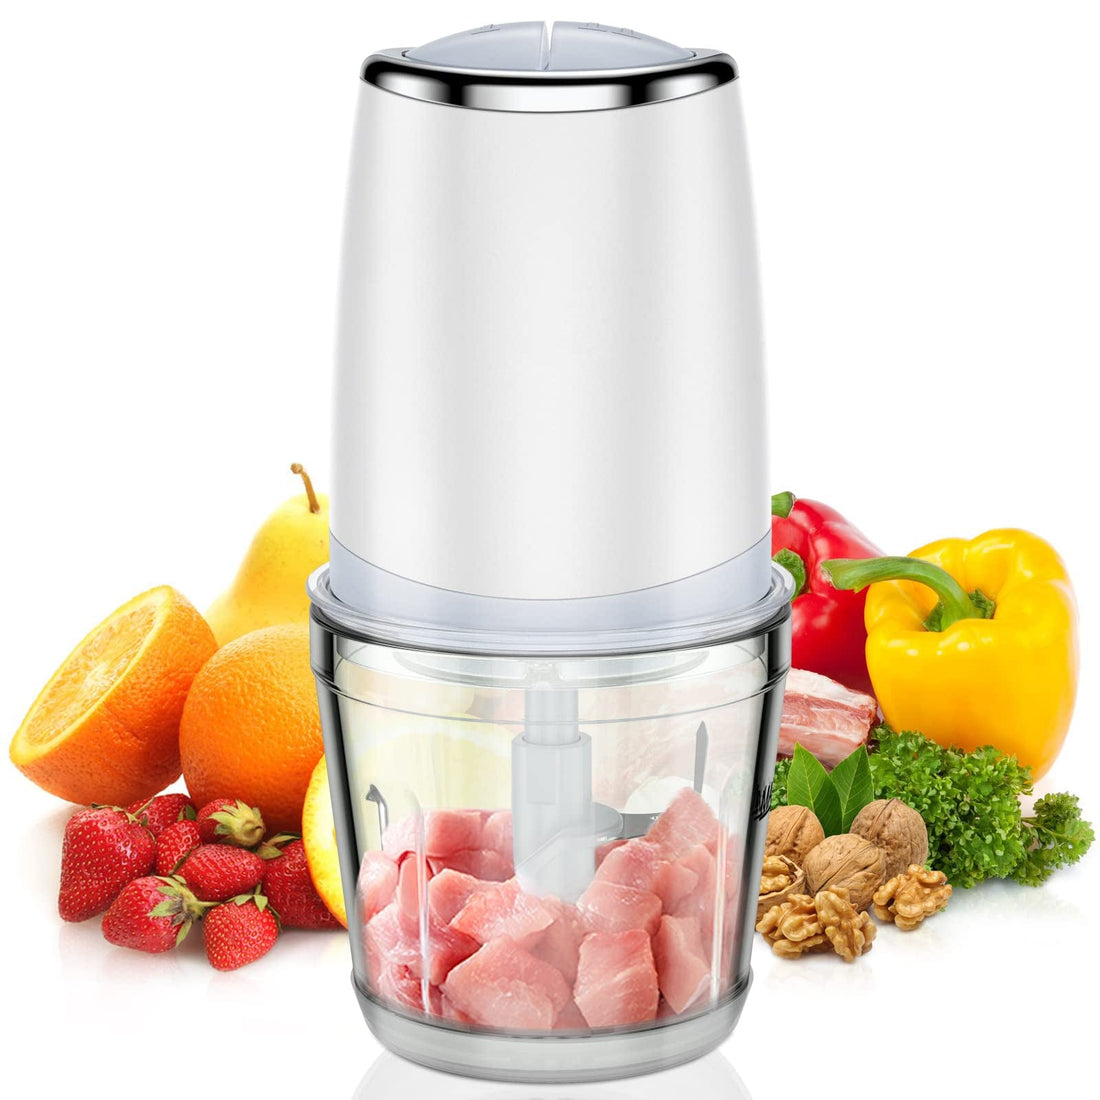 Mini Food Processor with 2.5 Cup Glass Bowl Small Electric Food Chopper